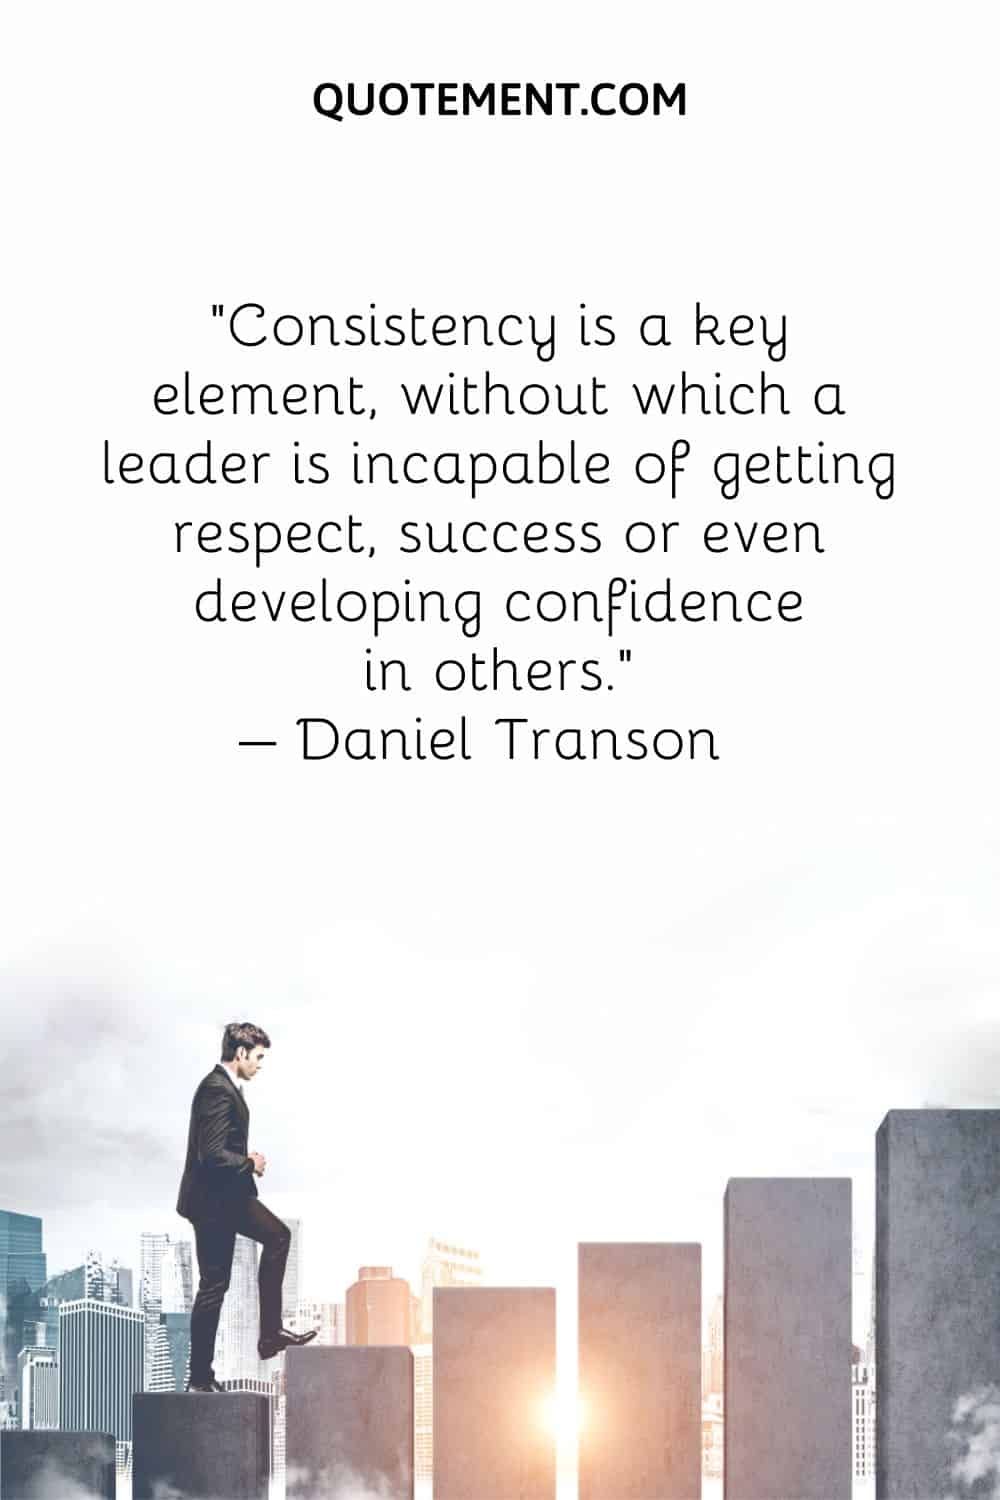 Consistency is a key element, without which a leader is incapable of getting respect, success or even developing confidence in others.